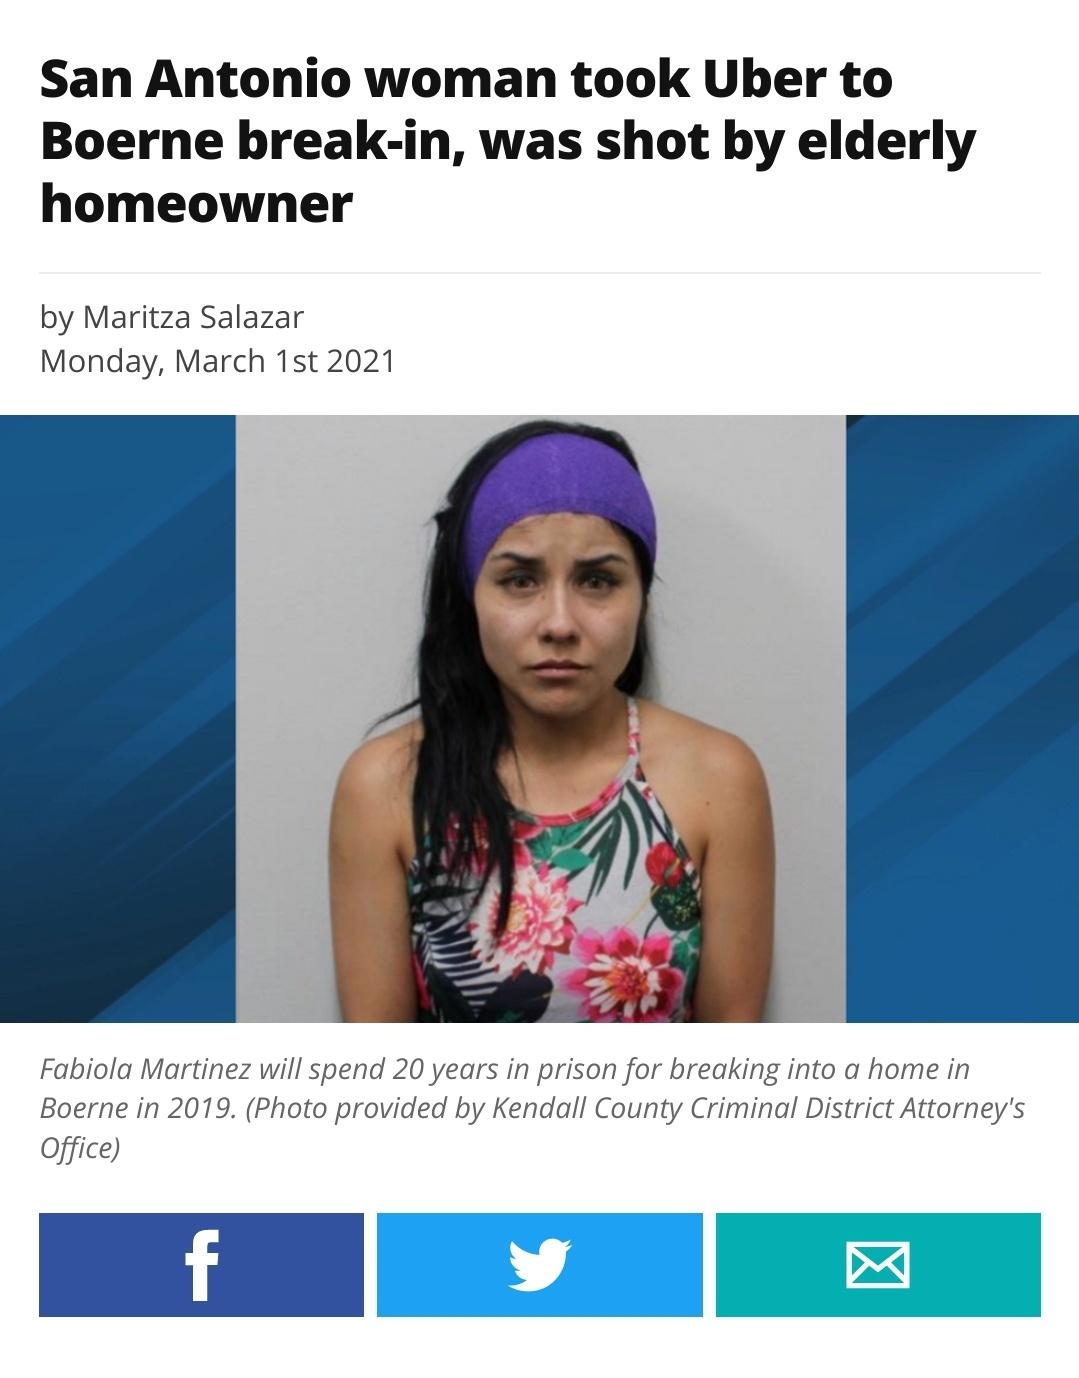 media - San Antonio woman took Uber to Boerne breakin, was shot by elderly homeowner by Maritza Salazar Monday, March 1st 2021 Fabiola Martinez will spend 20 years in prison for breaking into a home in Boerne in 2019. Photo provided by Kendall County Crim